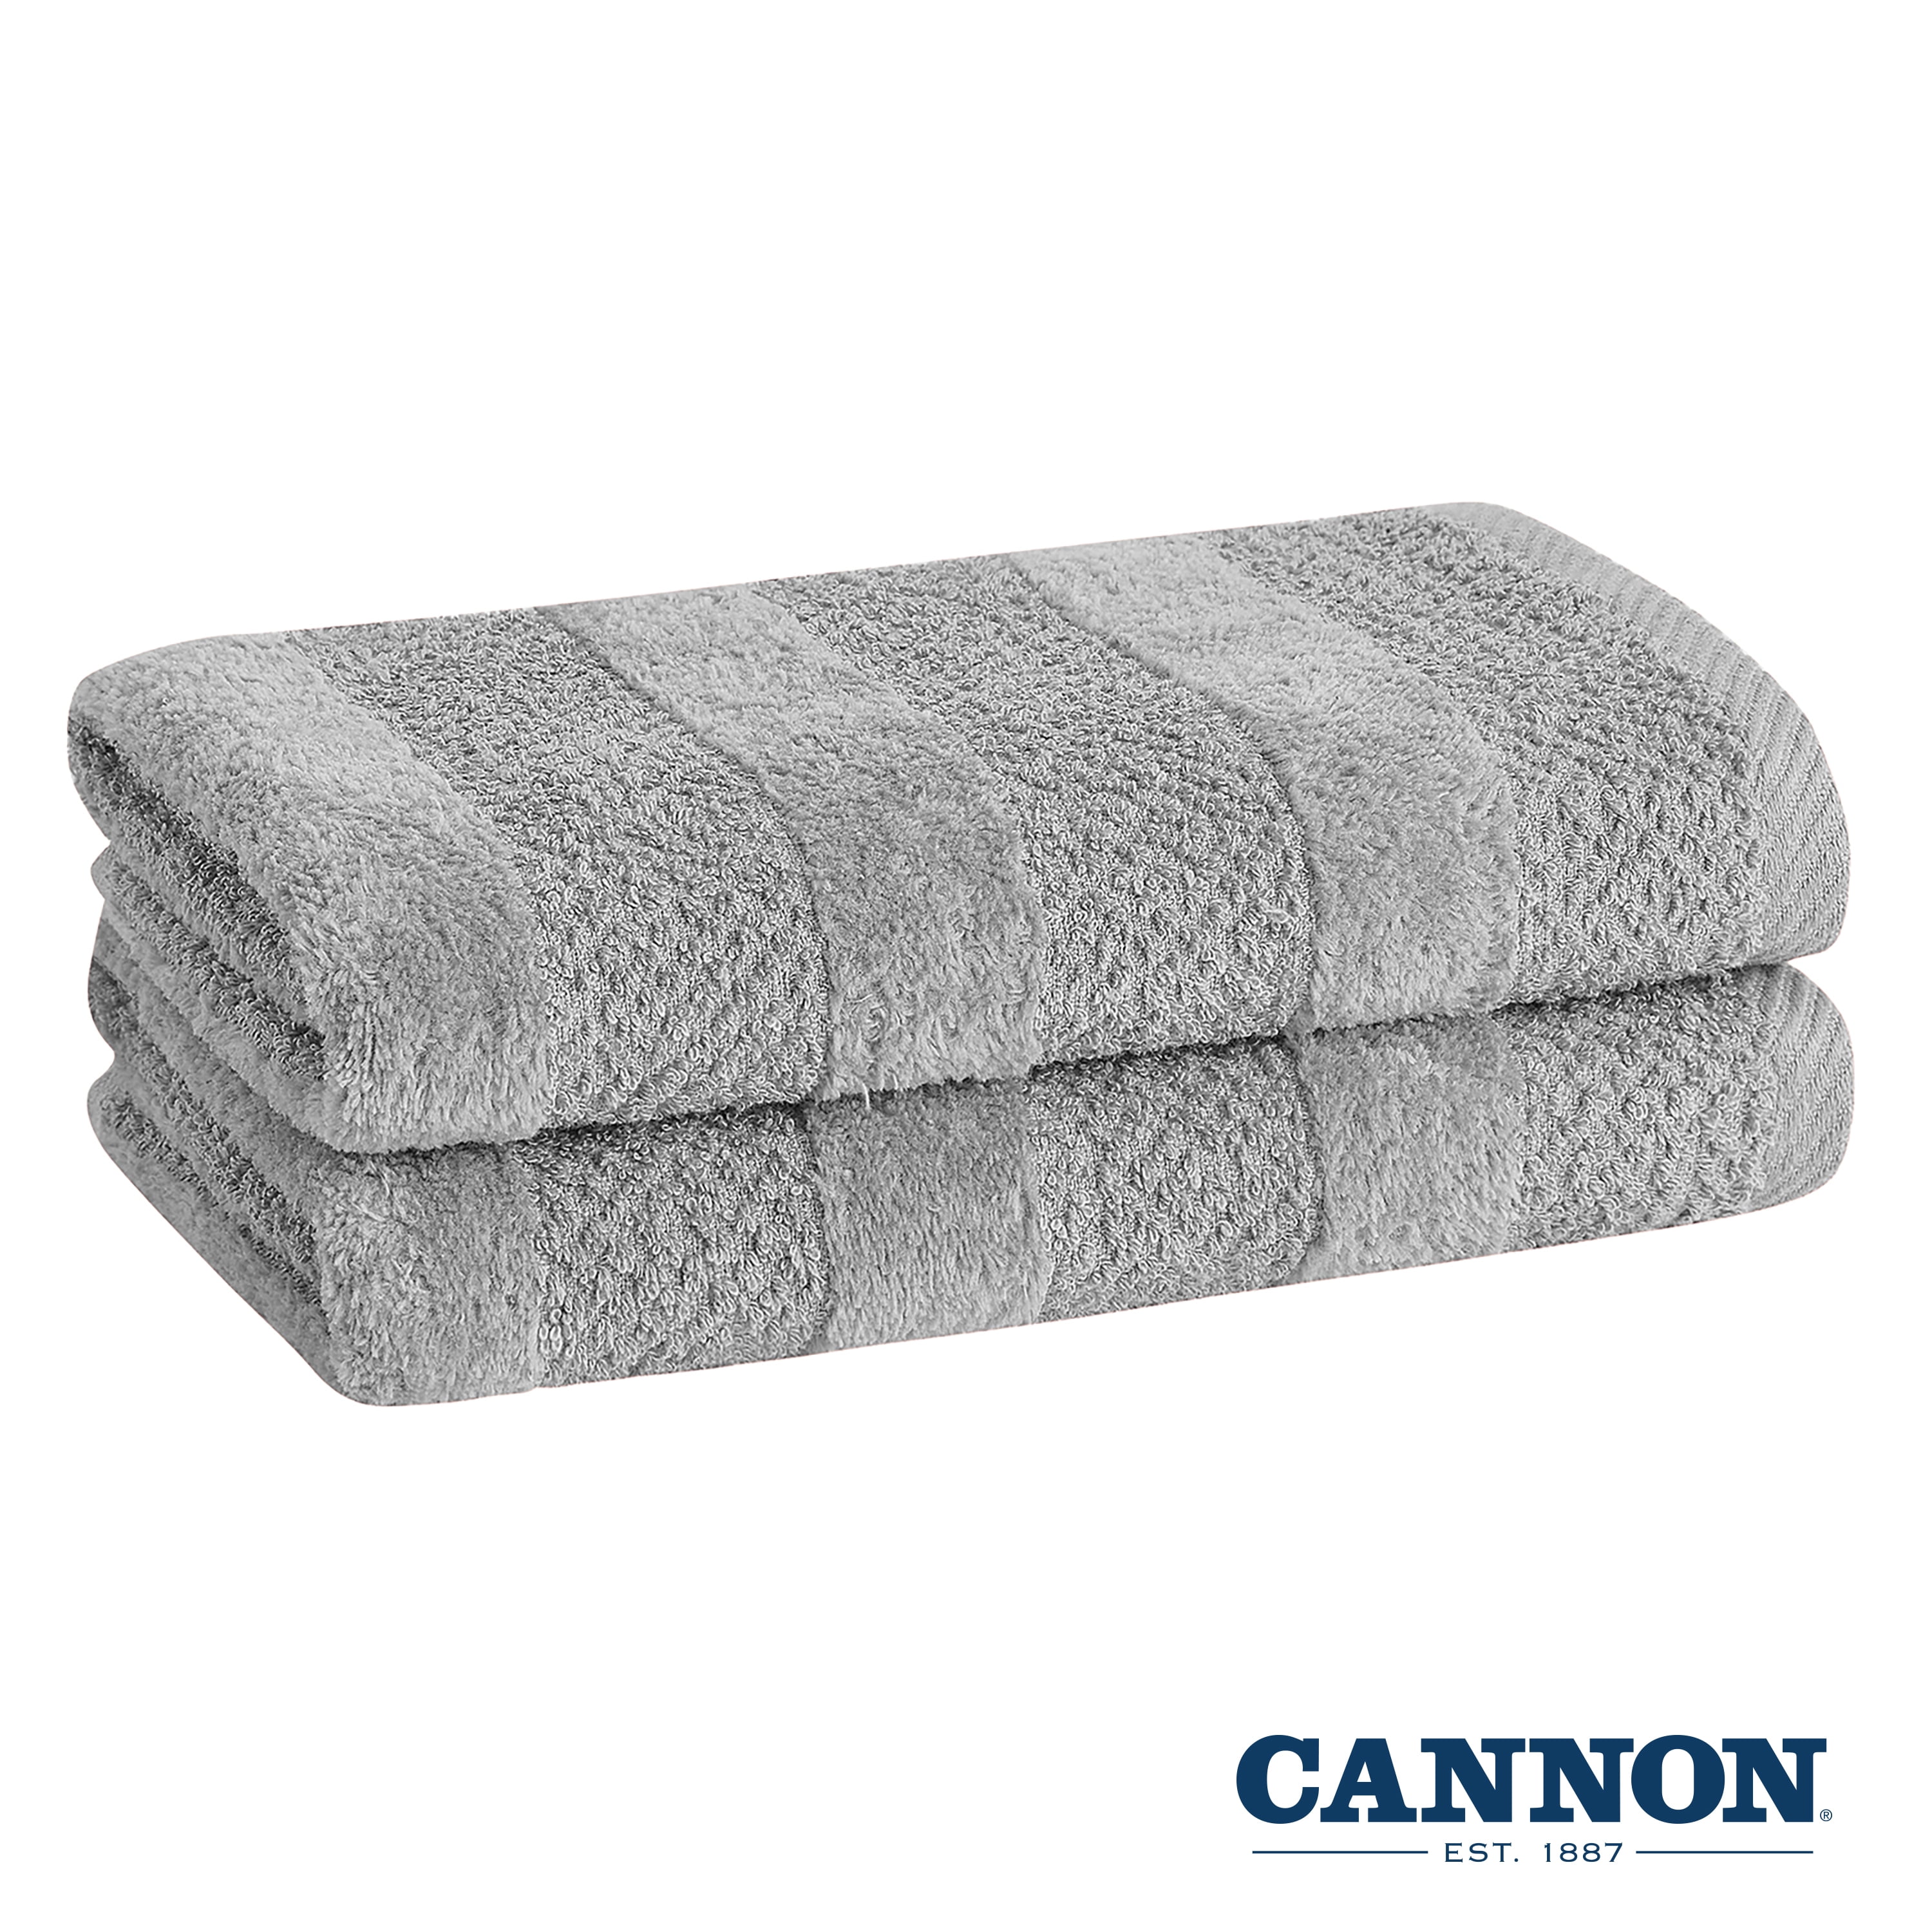 Cannon Ring Spun Cotton Bath Towels Hand Towels or Washcloths